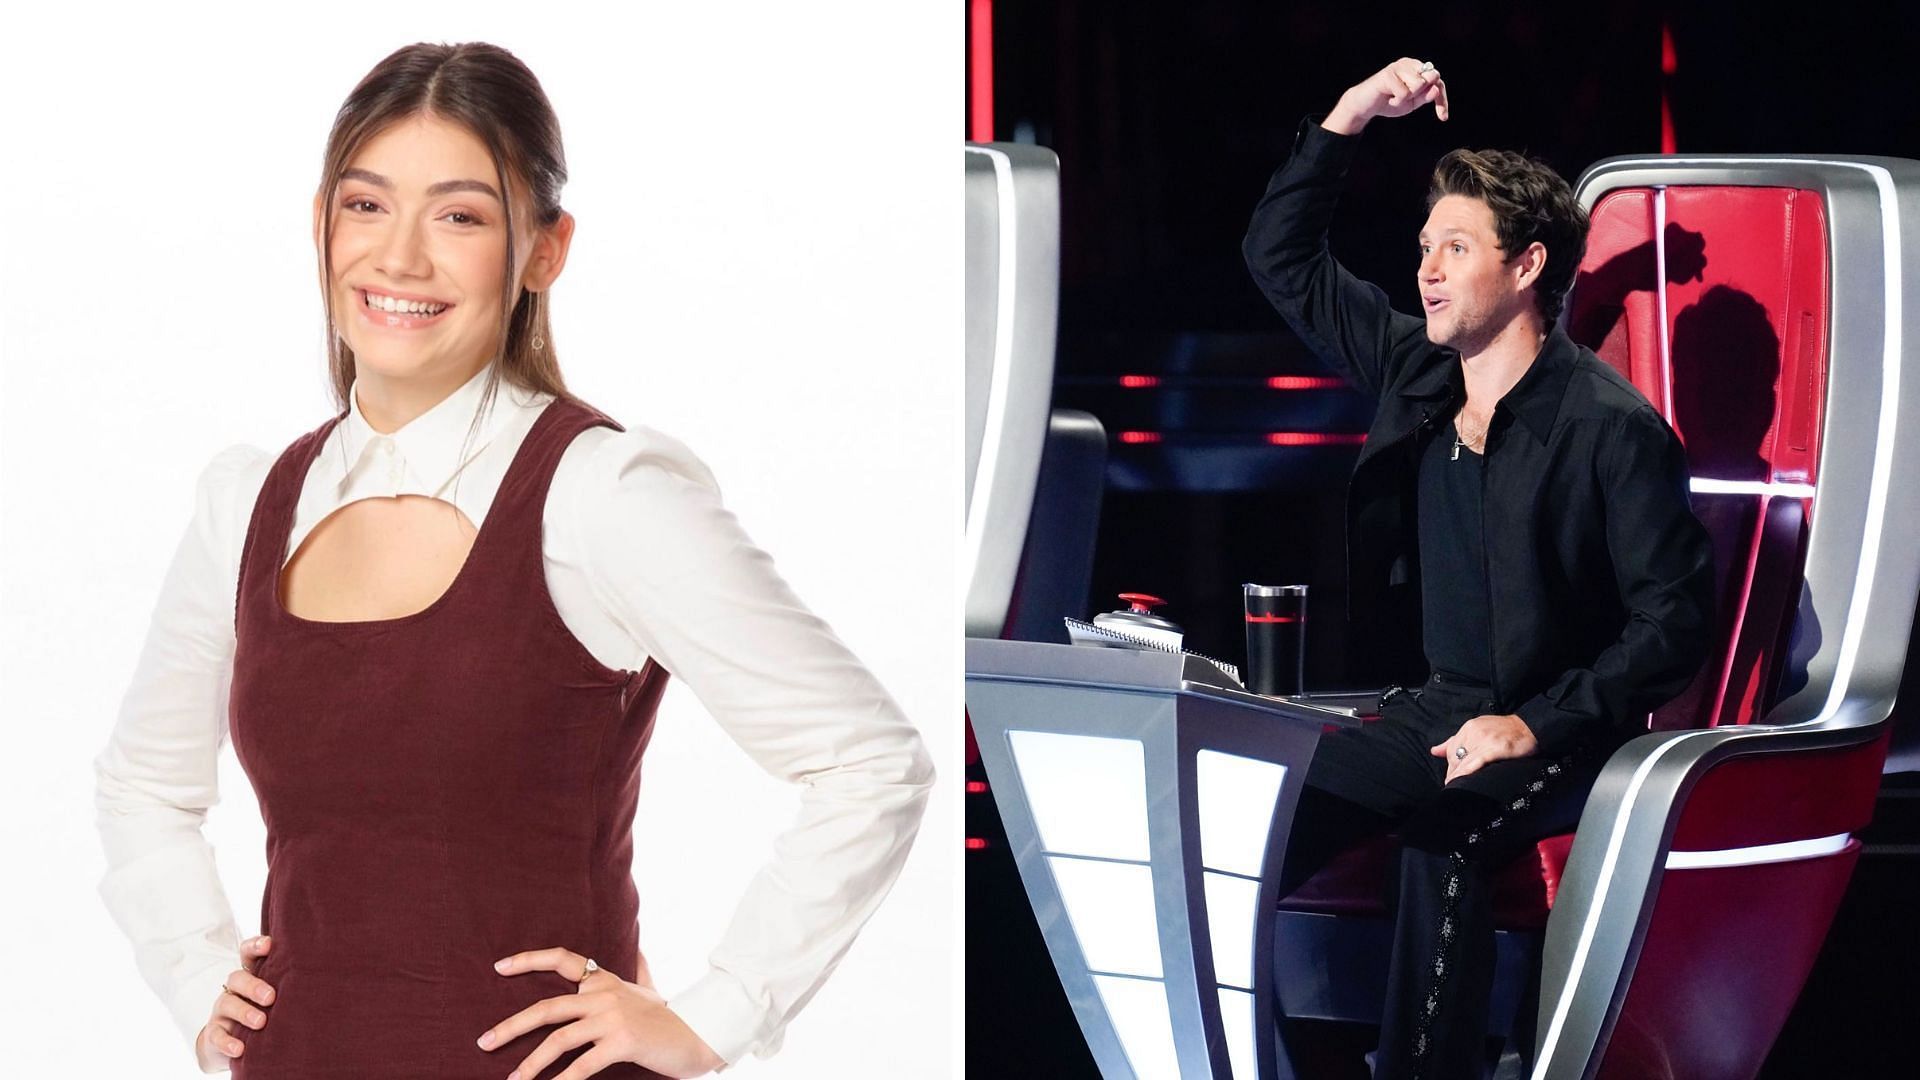 Gina Miles picks Niall Horan as coach on The Voice